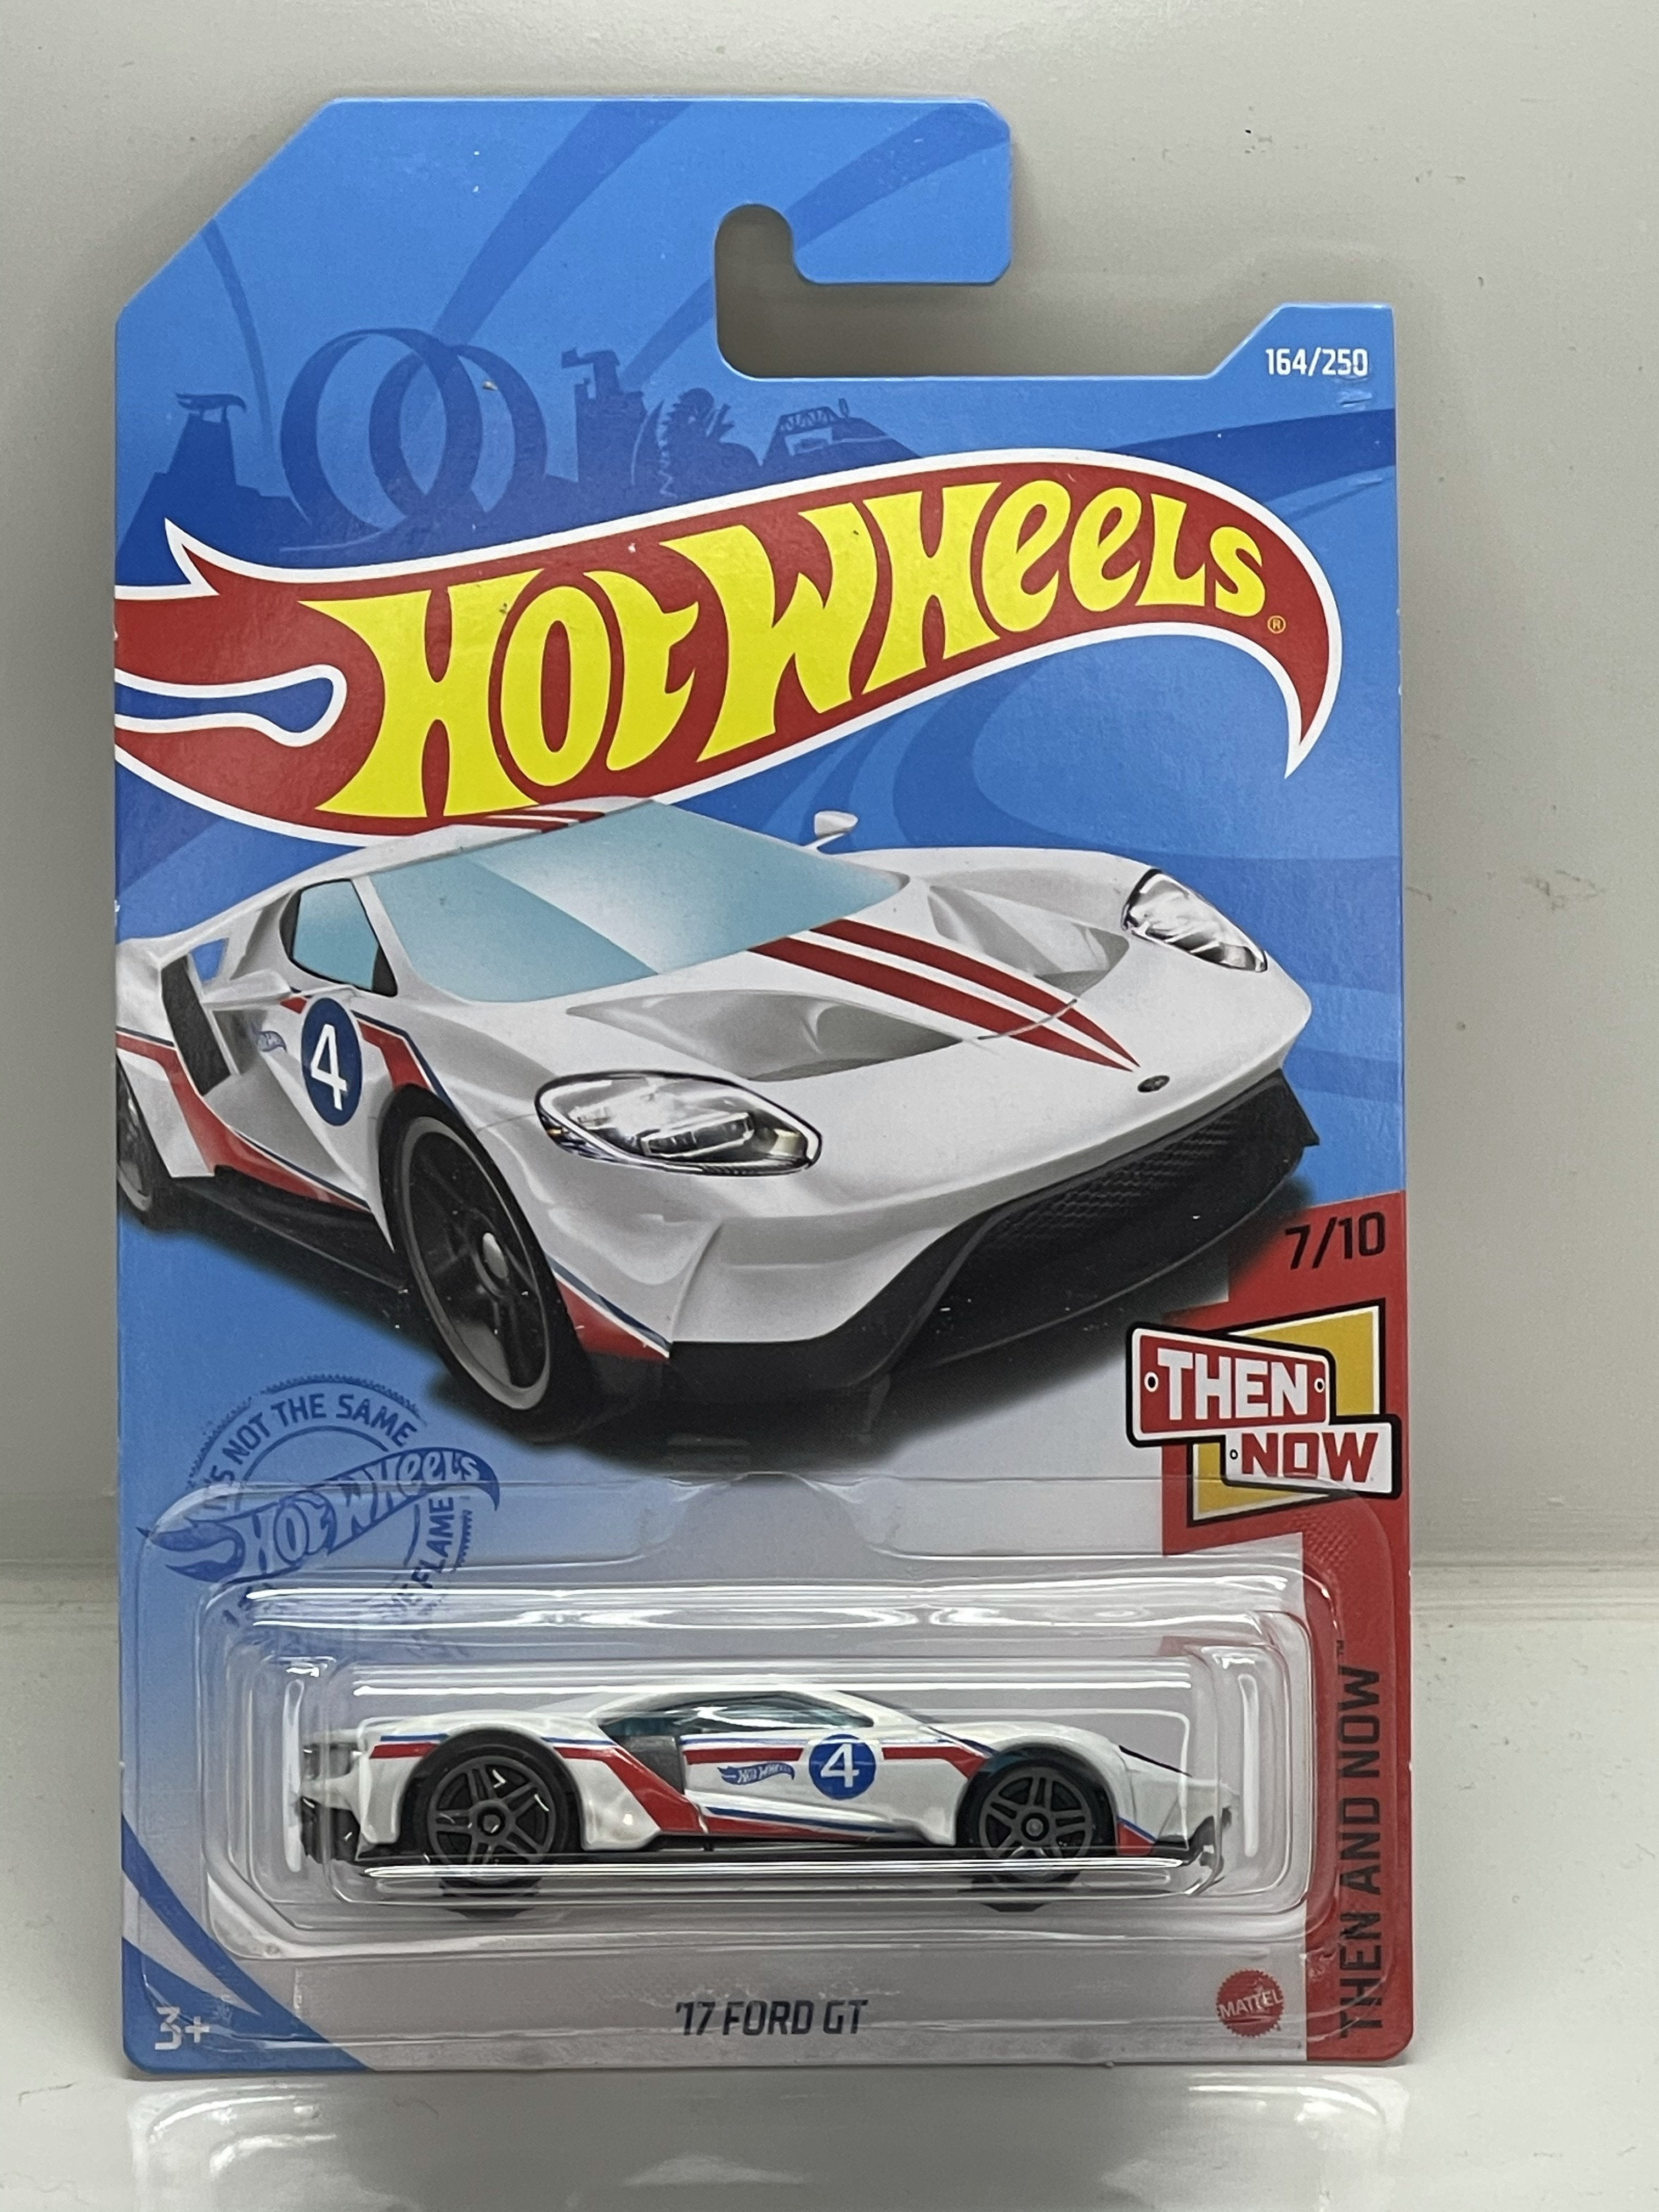 GDG44 17 FORD GT HOT Wheels 2/6 